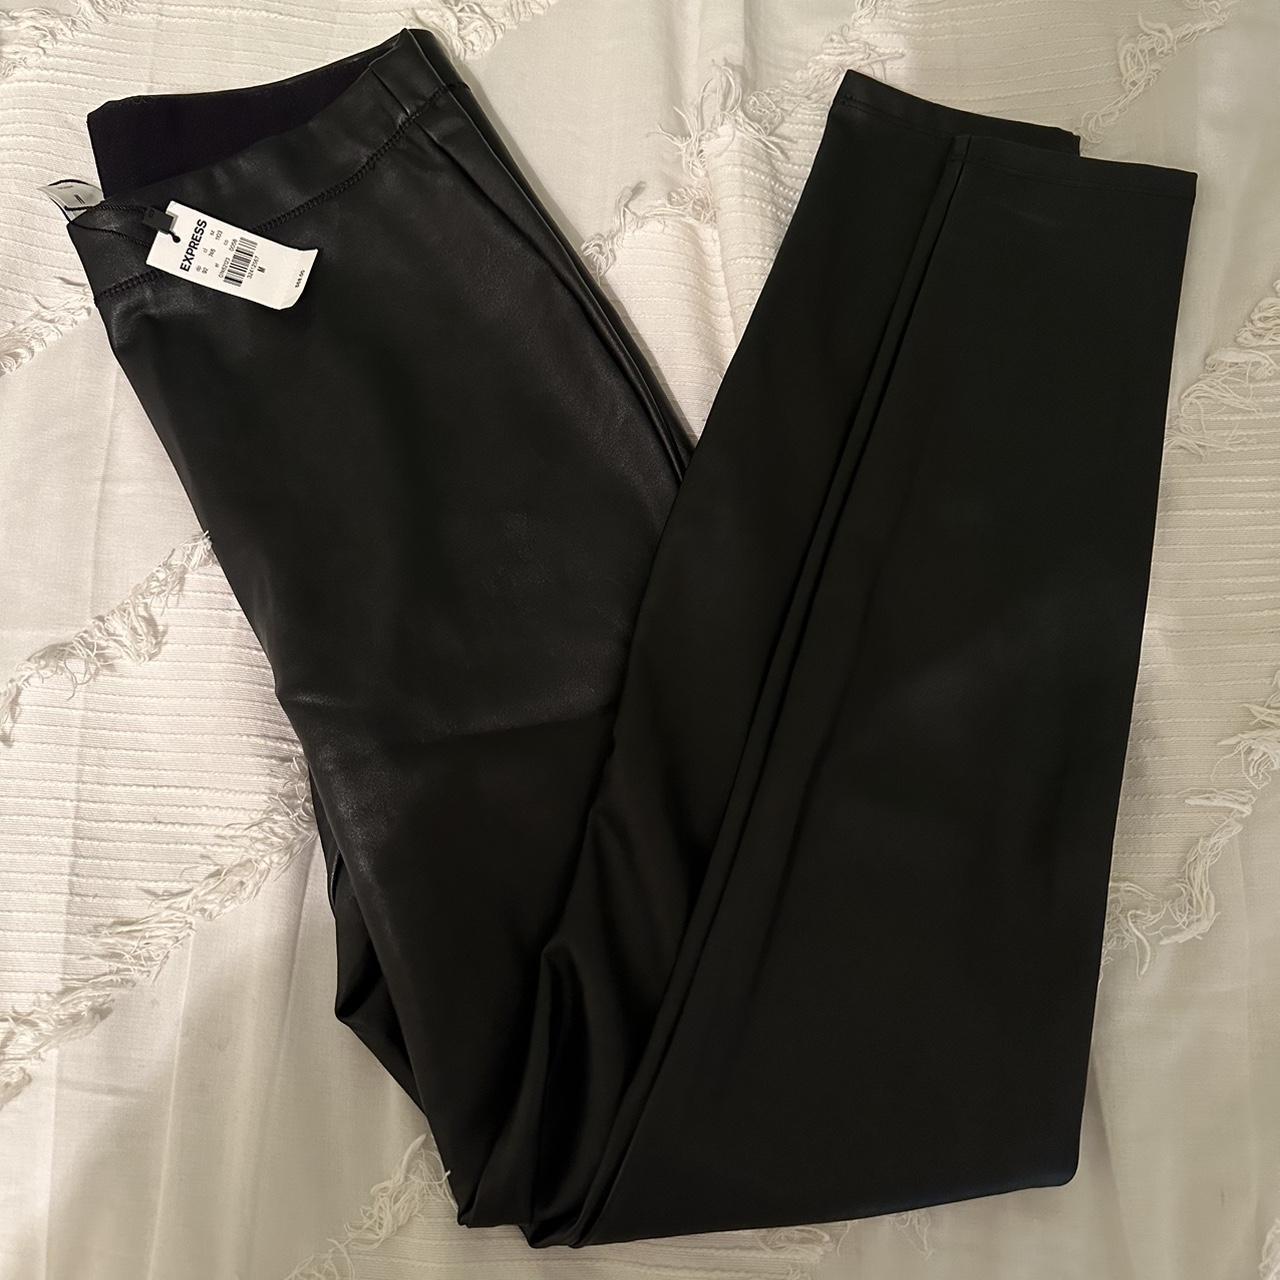 Express Faux Leather Leggings for Women for sale | eBay